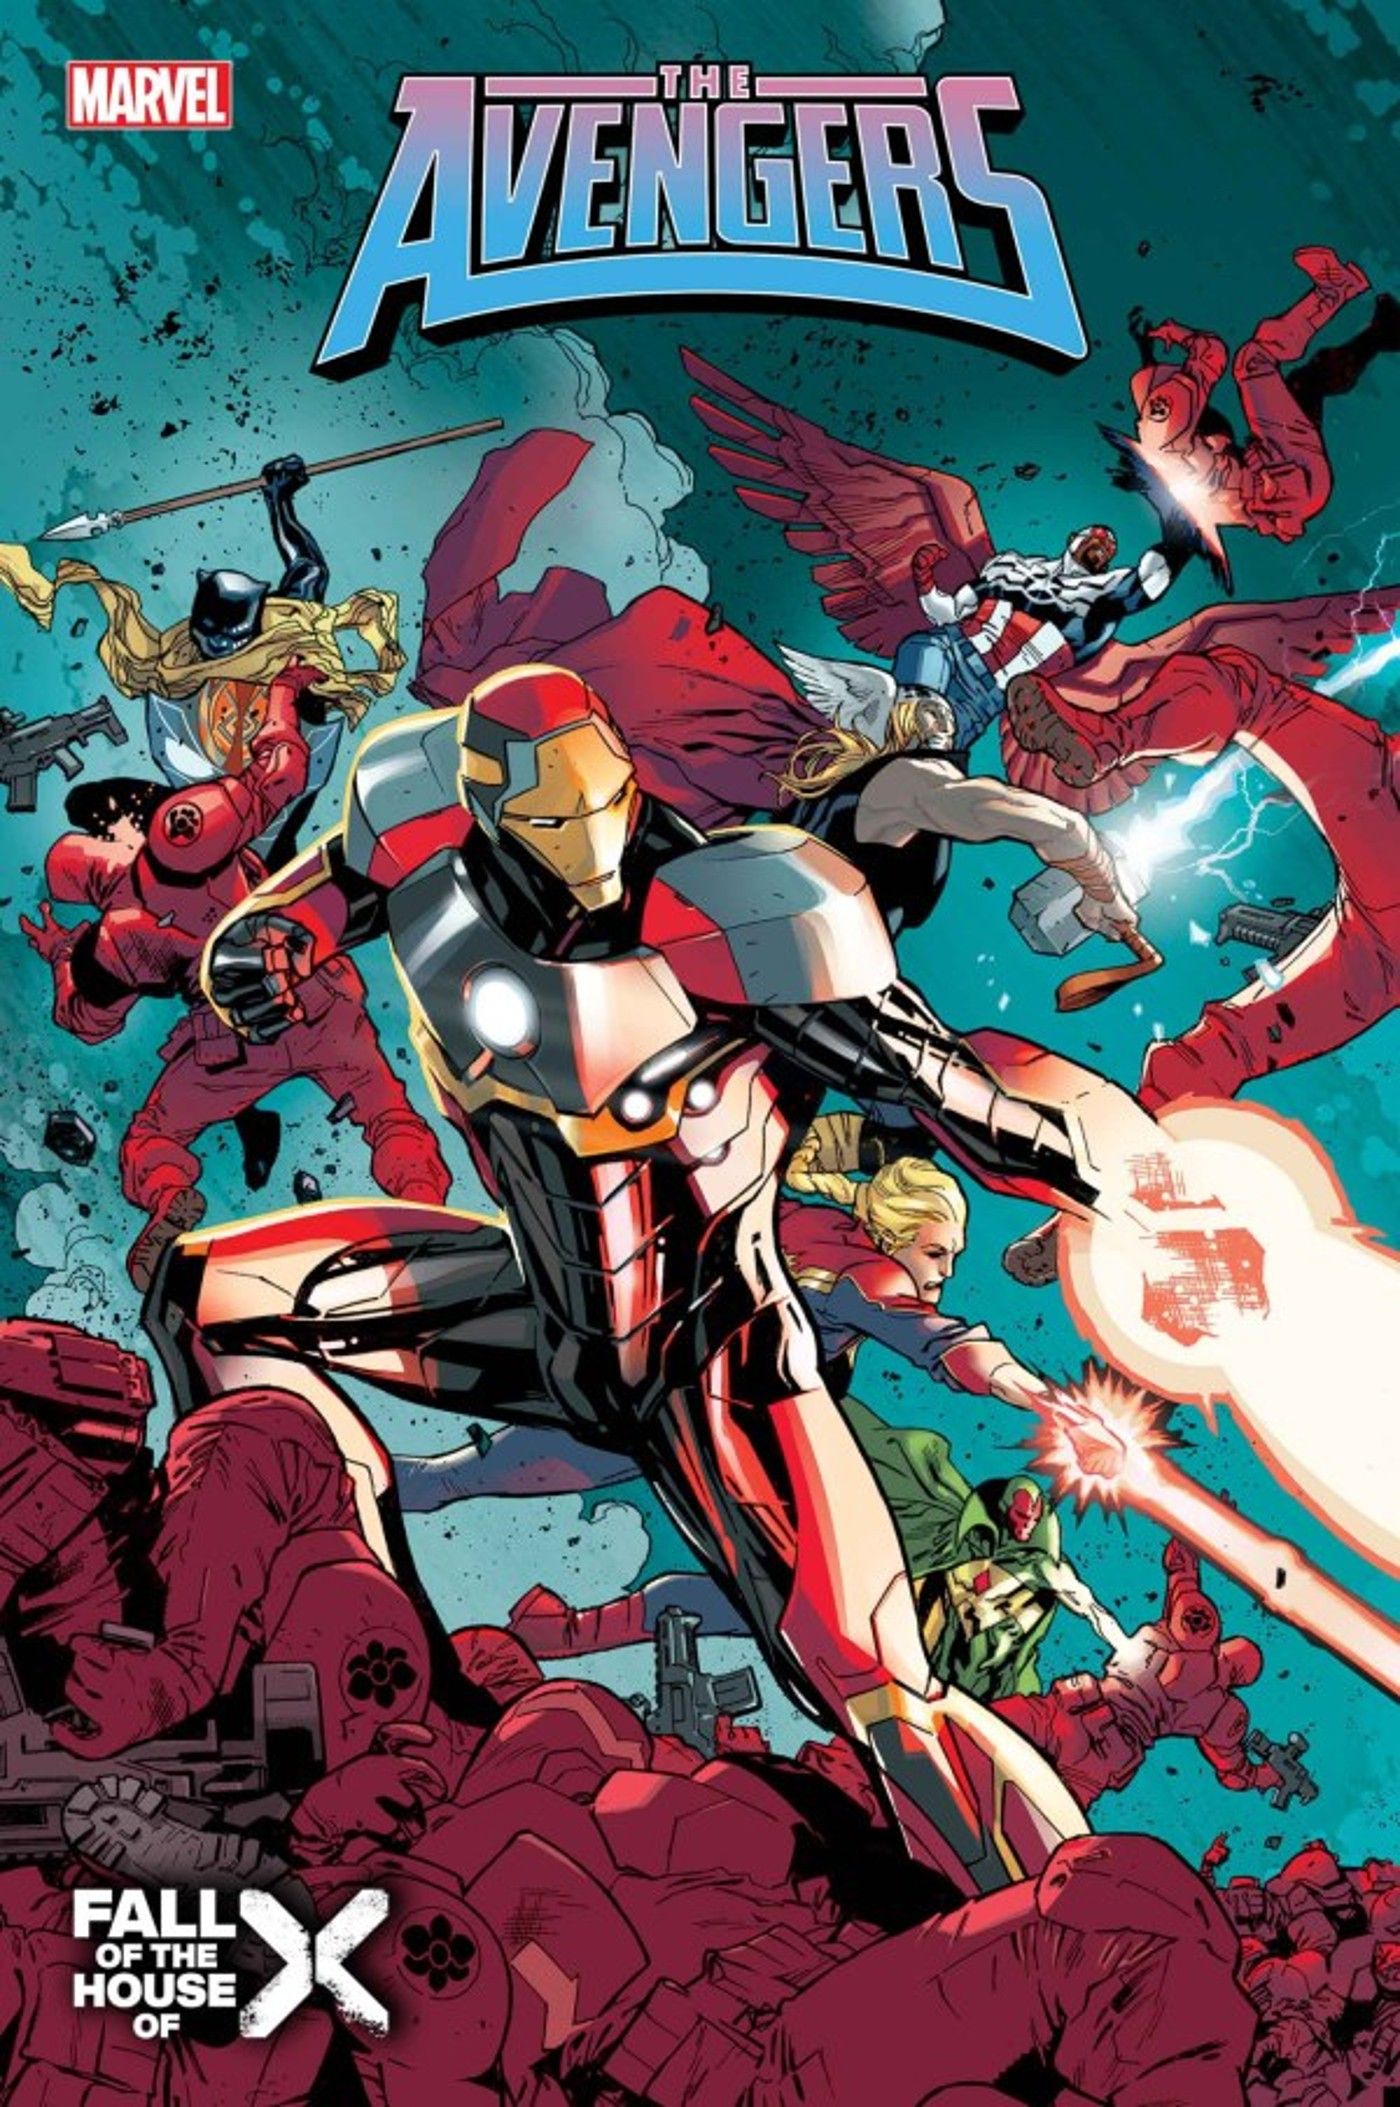 The Avengers #12 cover, Iron Man leads the Avengers in all out war against anti-mutant organization Orchis.